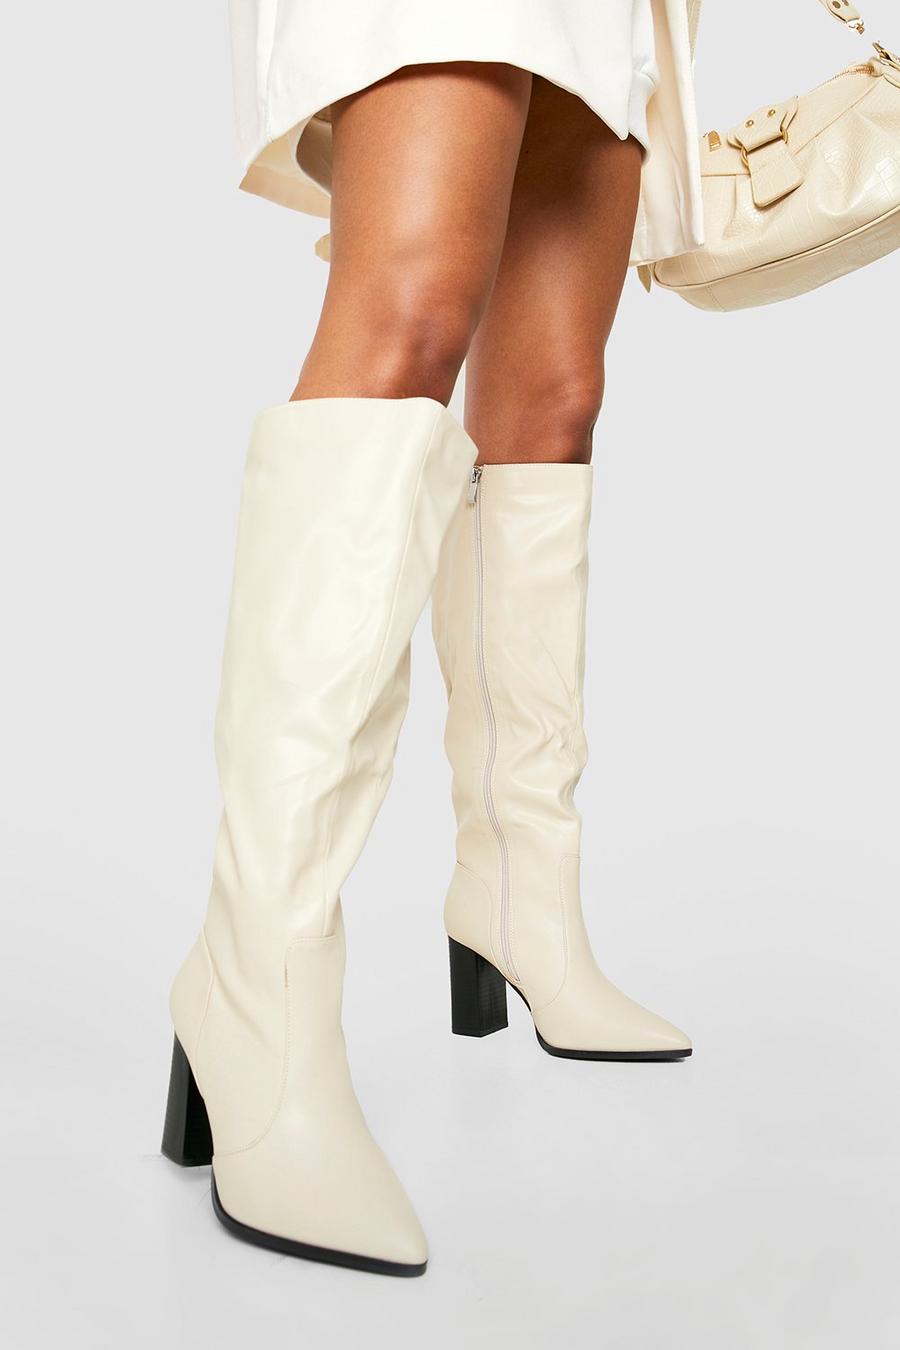 Cream white Wide Width Knee High Pointed Toe Boots